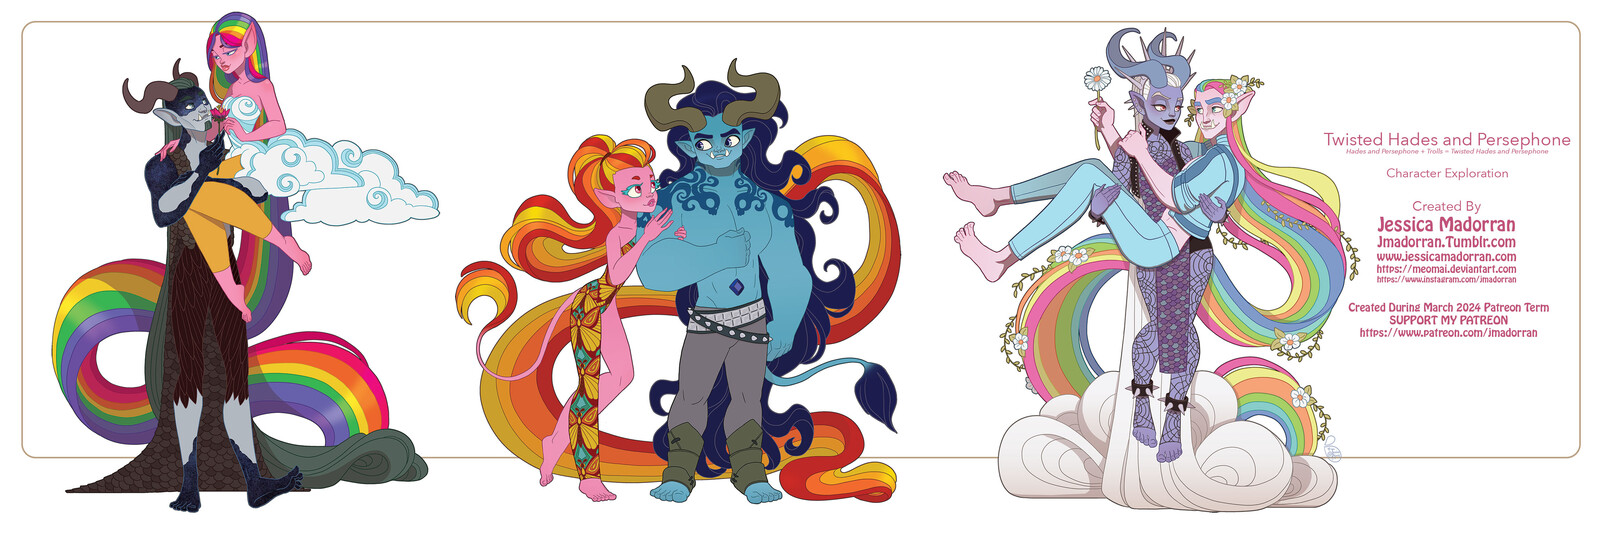 March 2024 Patreon - Twisted Hades and Persephone (Trolls) Character Exploration